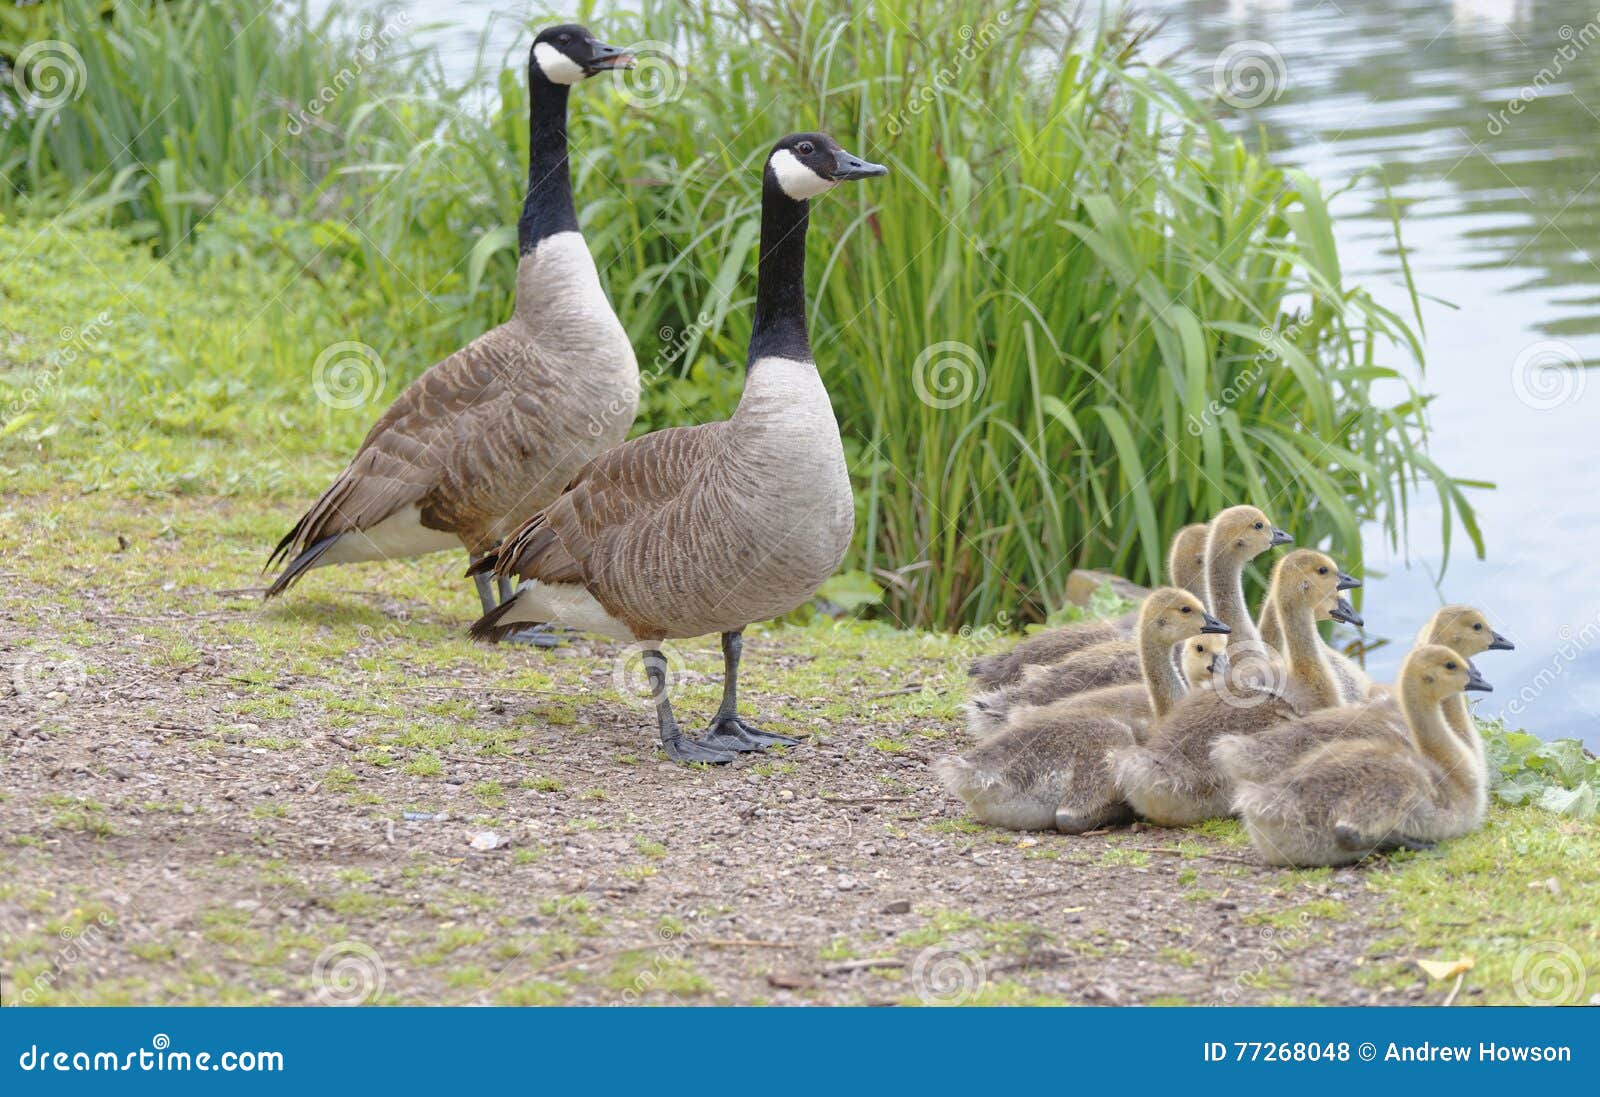 canada geese family, hertfordshire, england